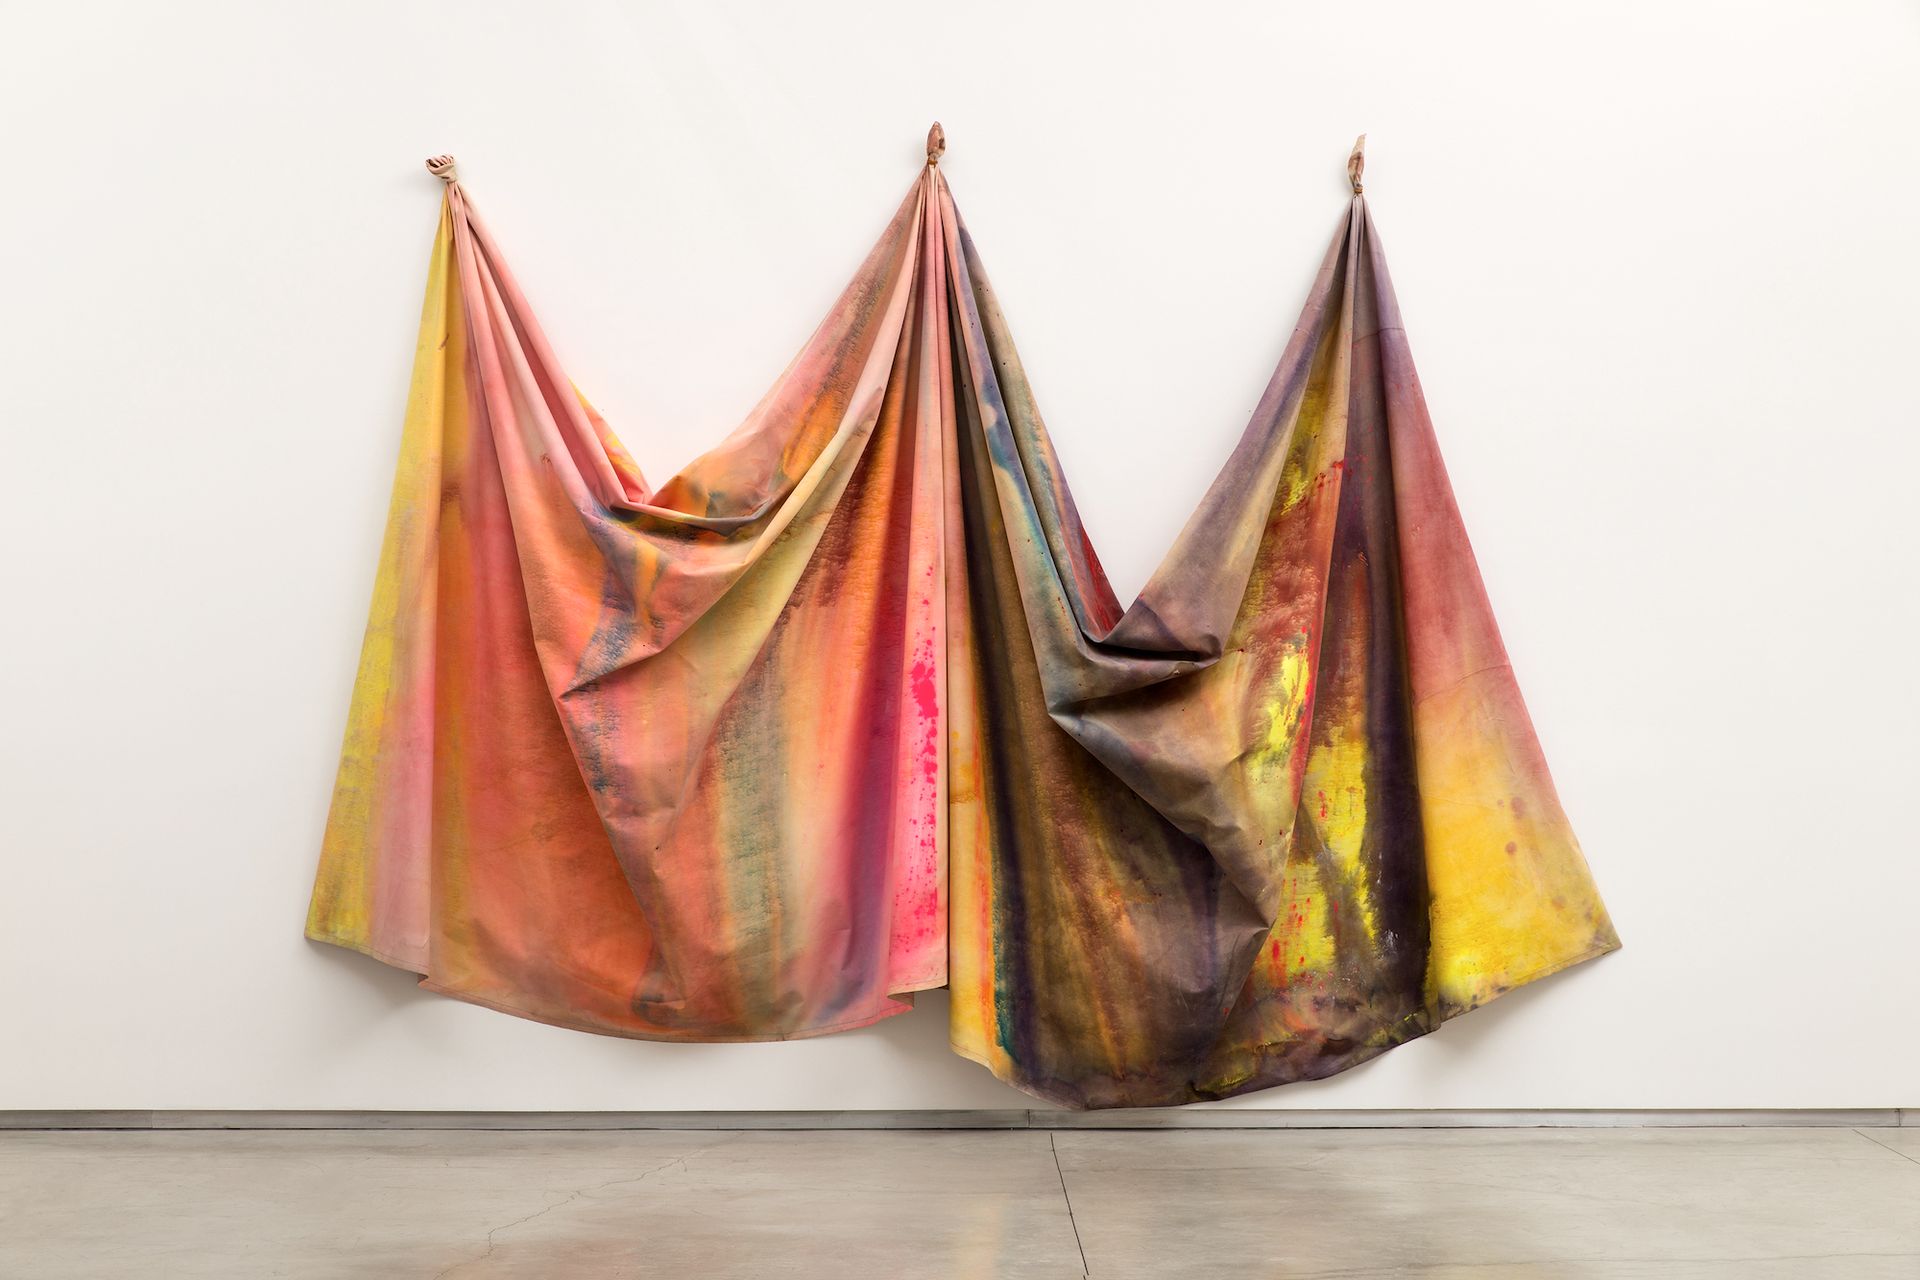 Sam Gilliam, 10/27/69, 1969, collection of the Museum of Modern Art, New York Courtesy of David Kordansky Gallery, Los Angeles and Pace Gallery. Photography by Fredrik Nilsen Studio.